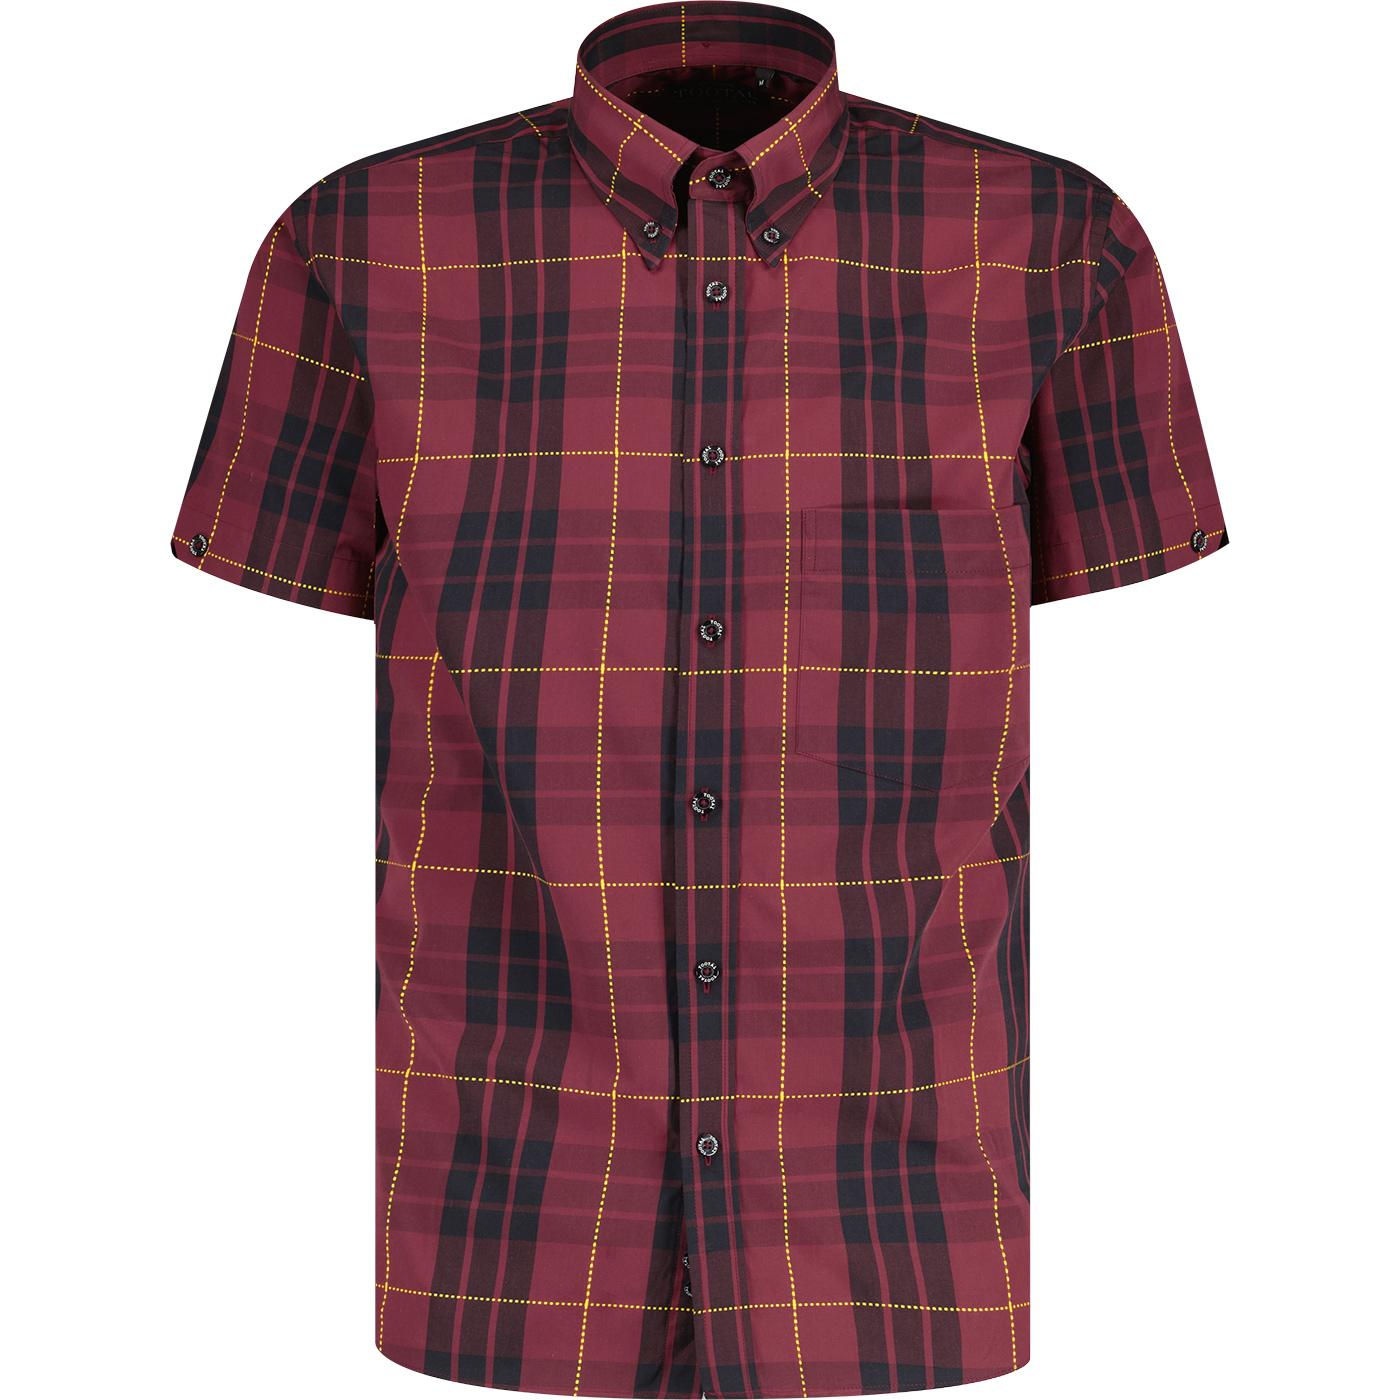 Tootal Mod Slim Fit Oxblood Stitch Check Button Down S/S Shirt